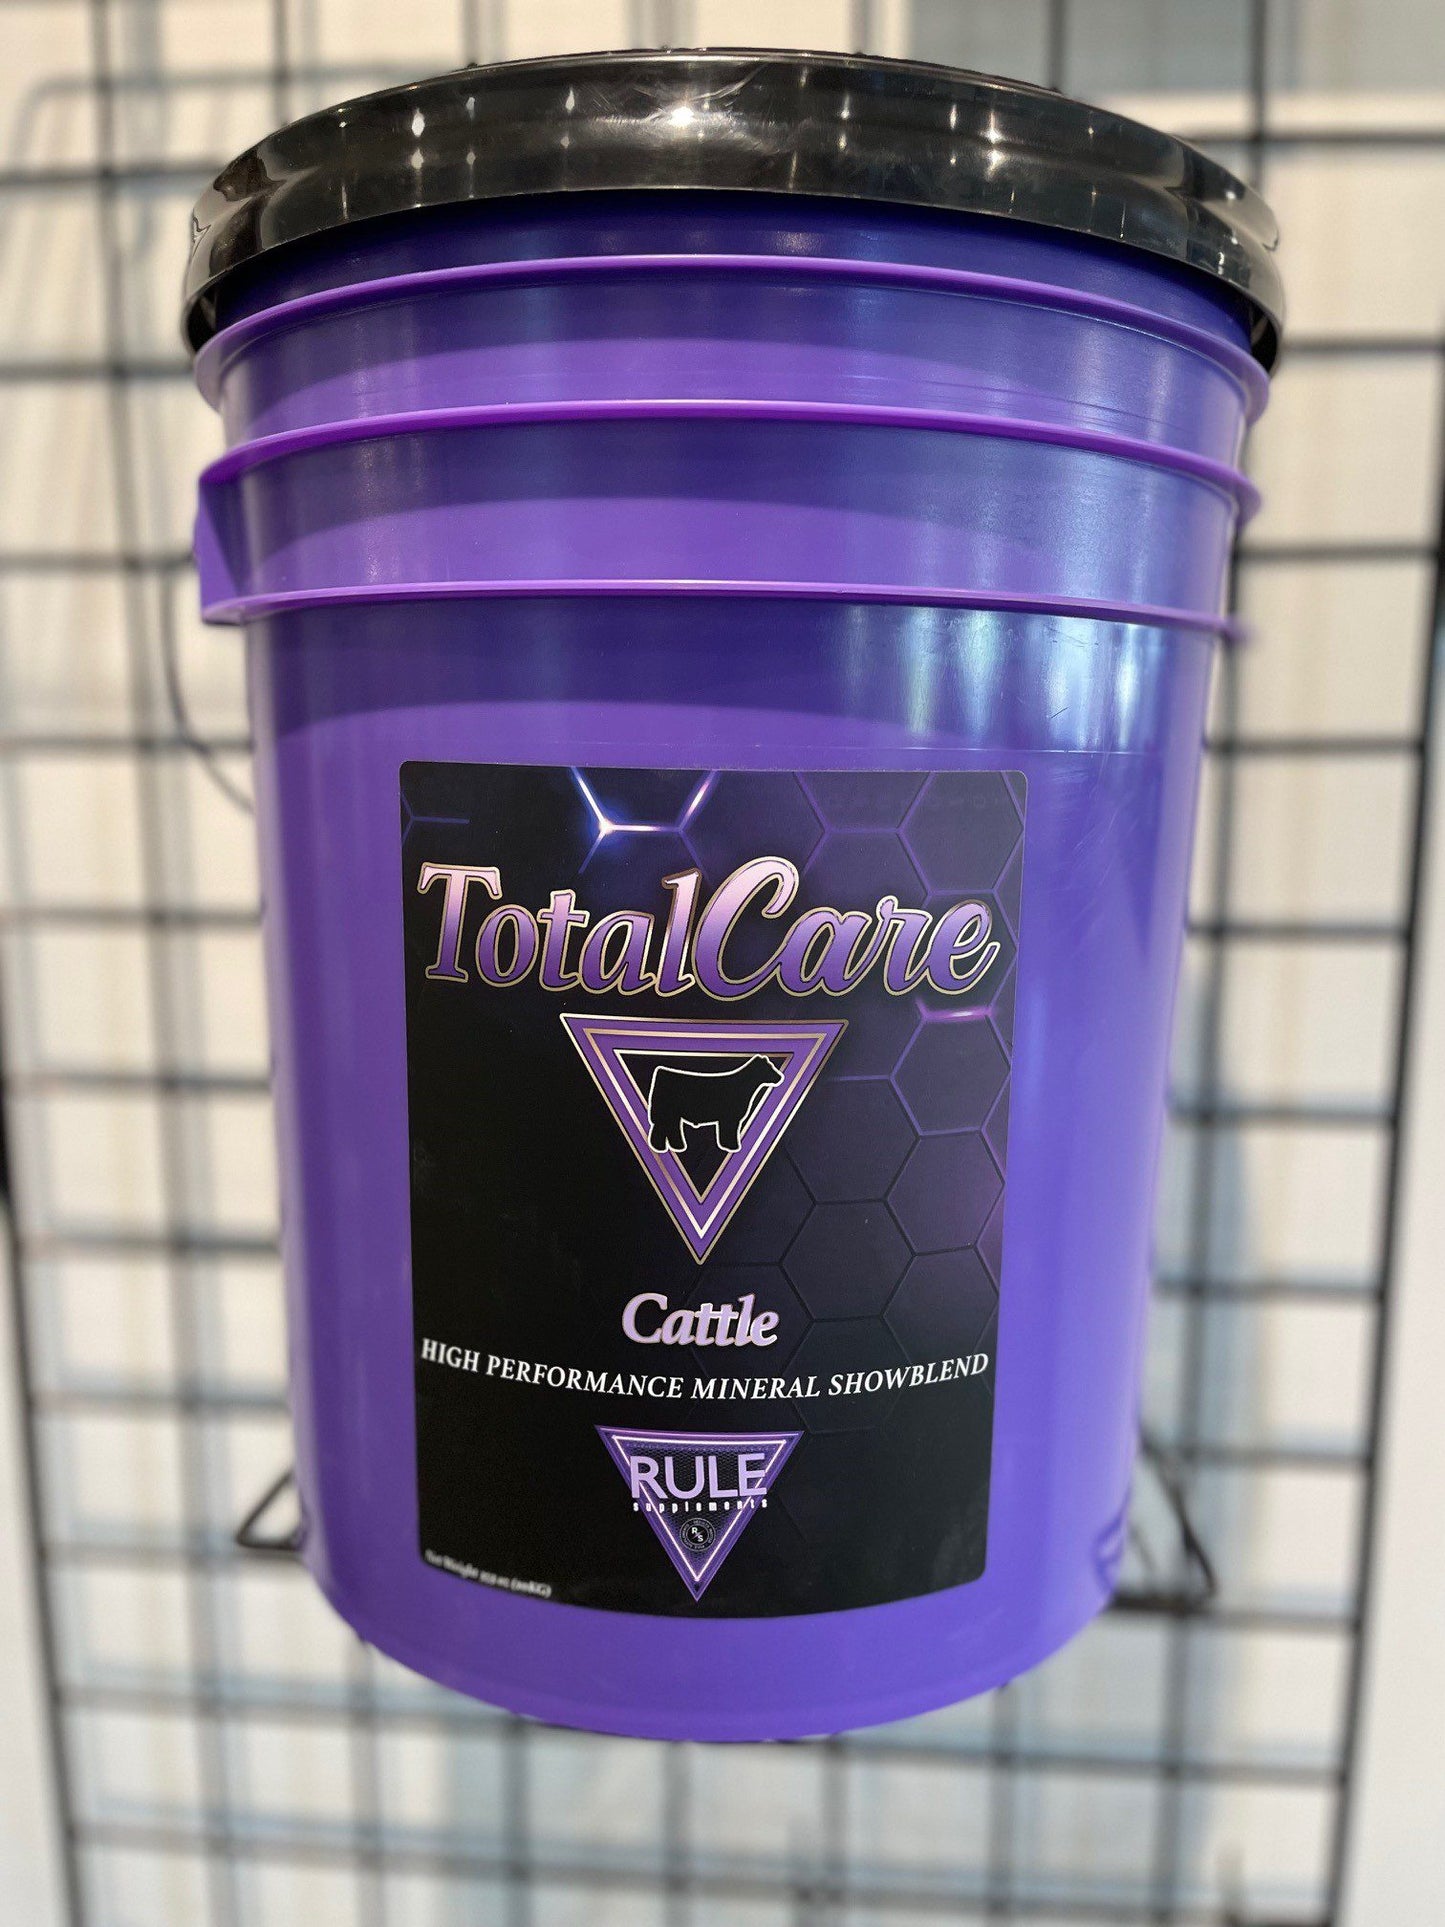 Total Care Cattle bucket